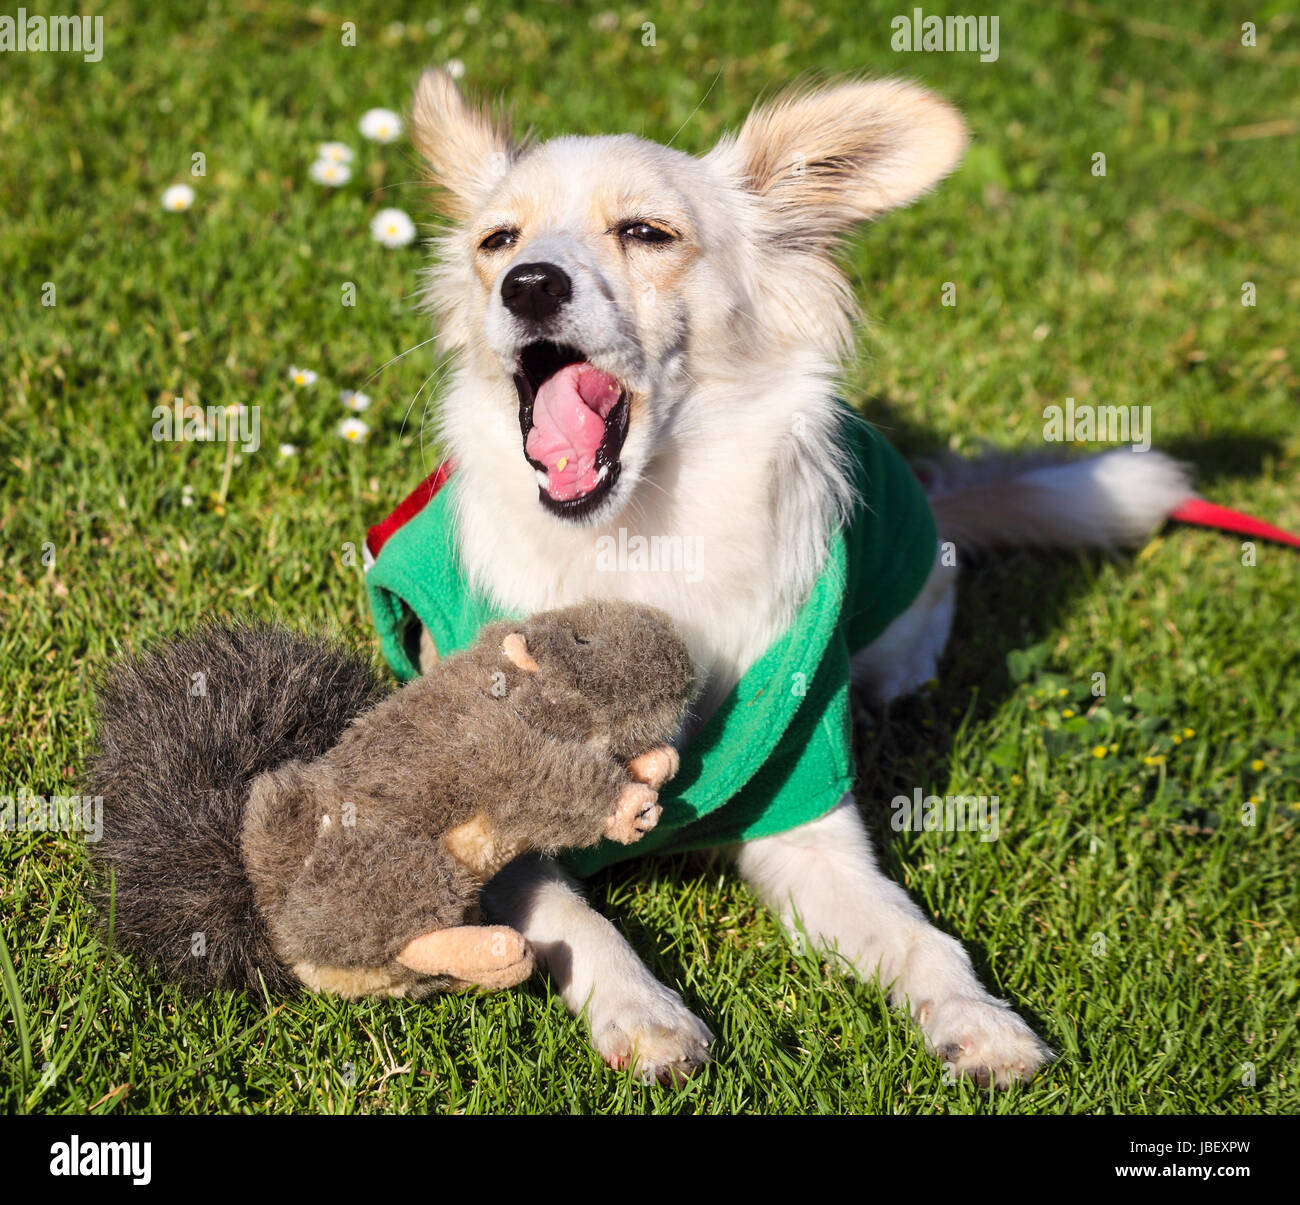 Puppy with toy squirrel Stock Photo